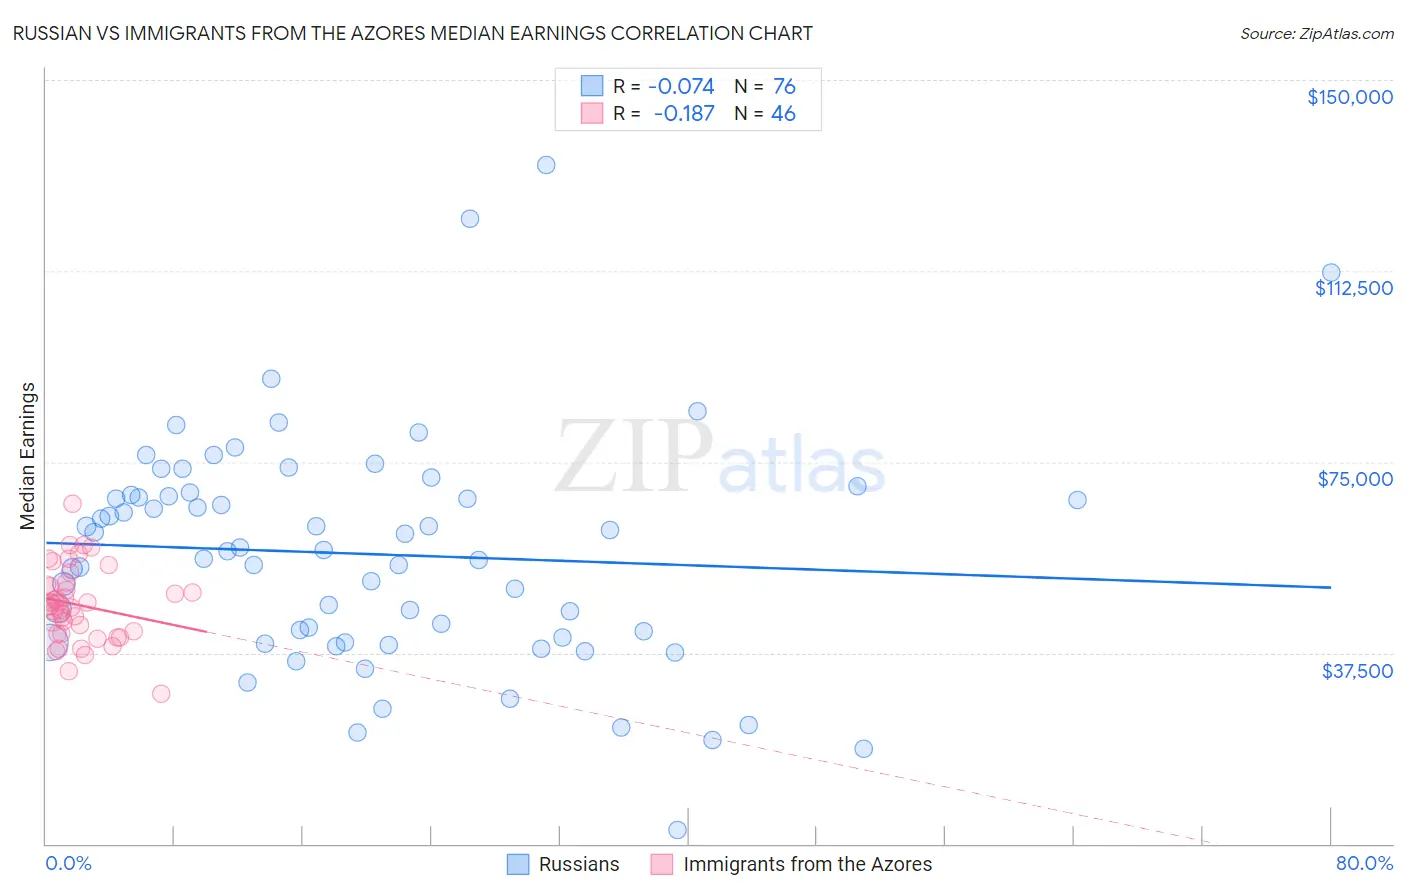 Russian vs Immigrants from the Azores Median Earnings